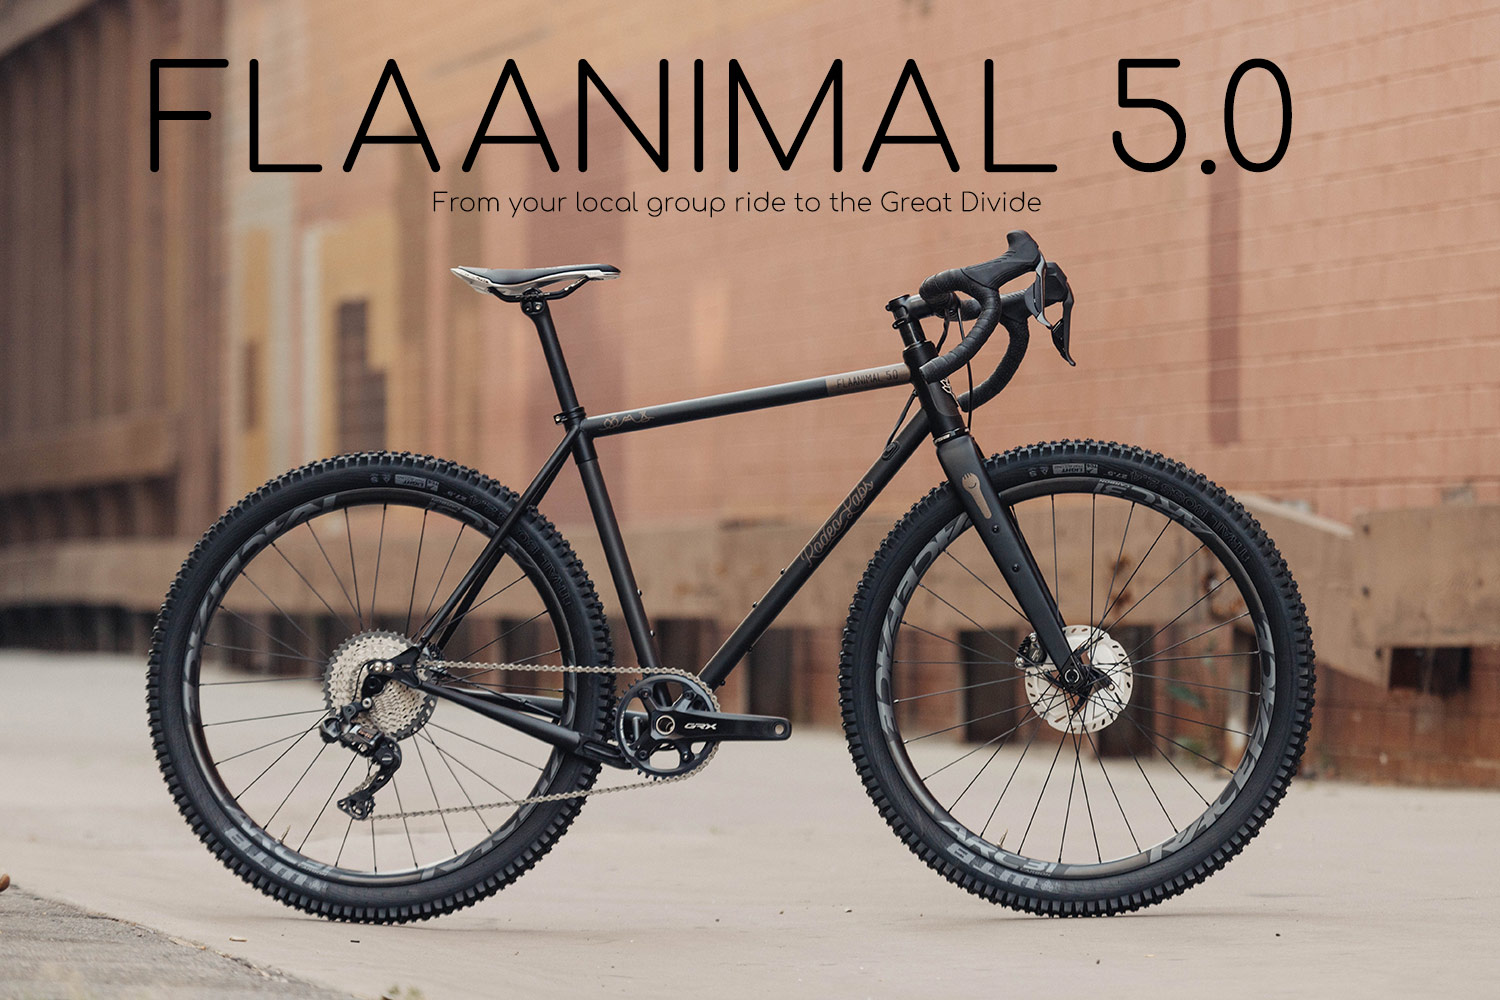 Flaanimal 5.0 - From your local group ride to the Great Divide